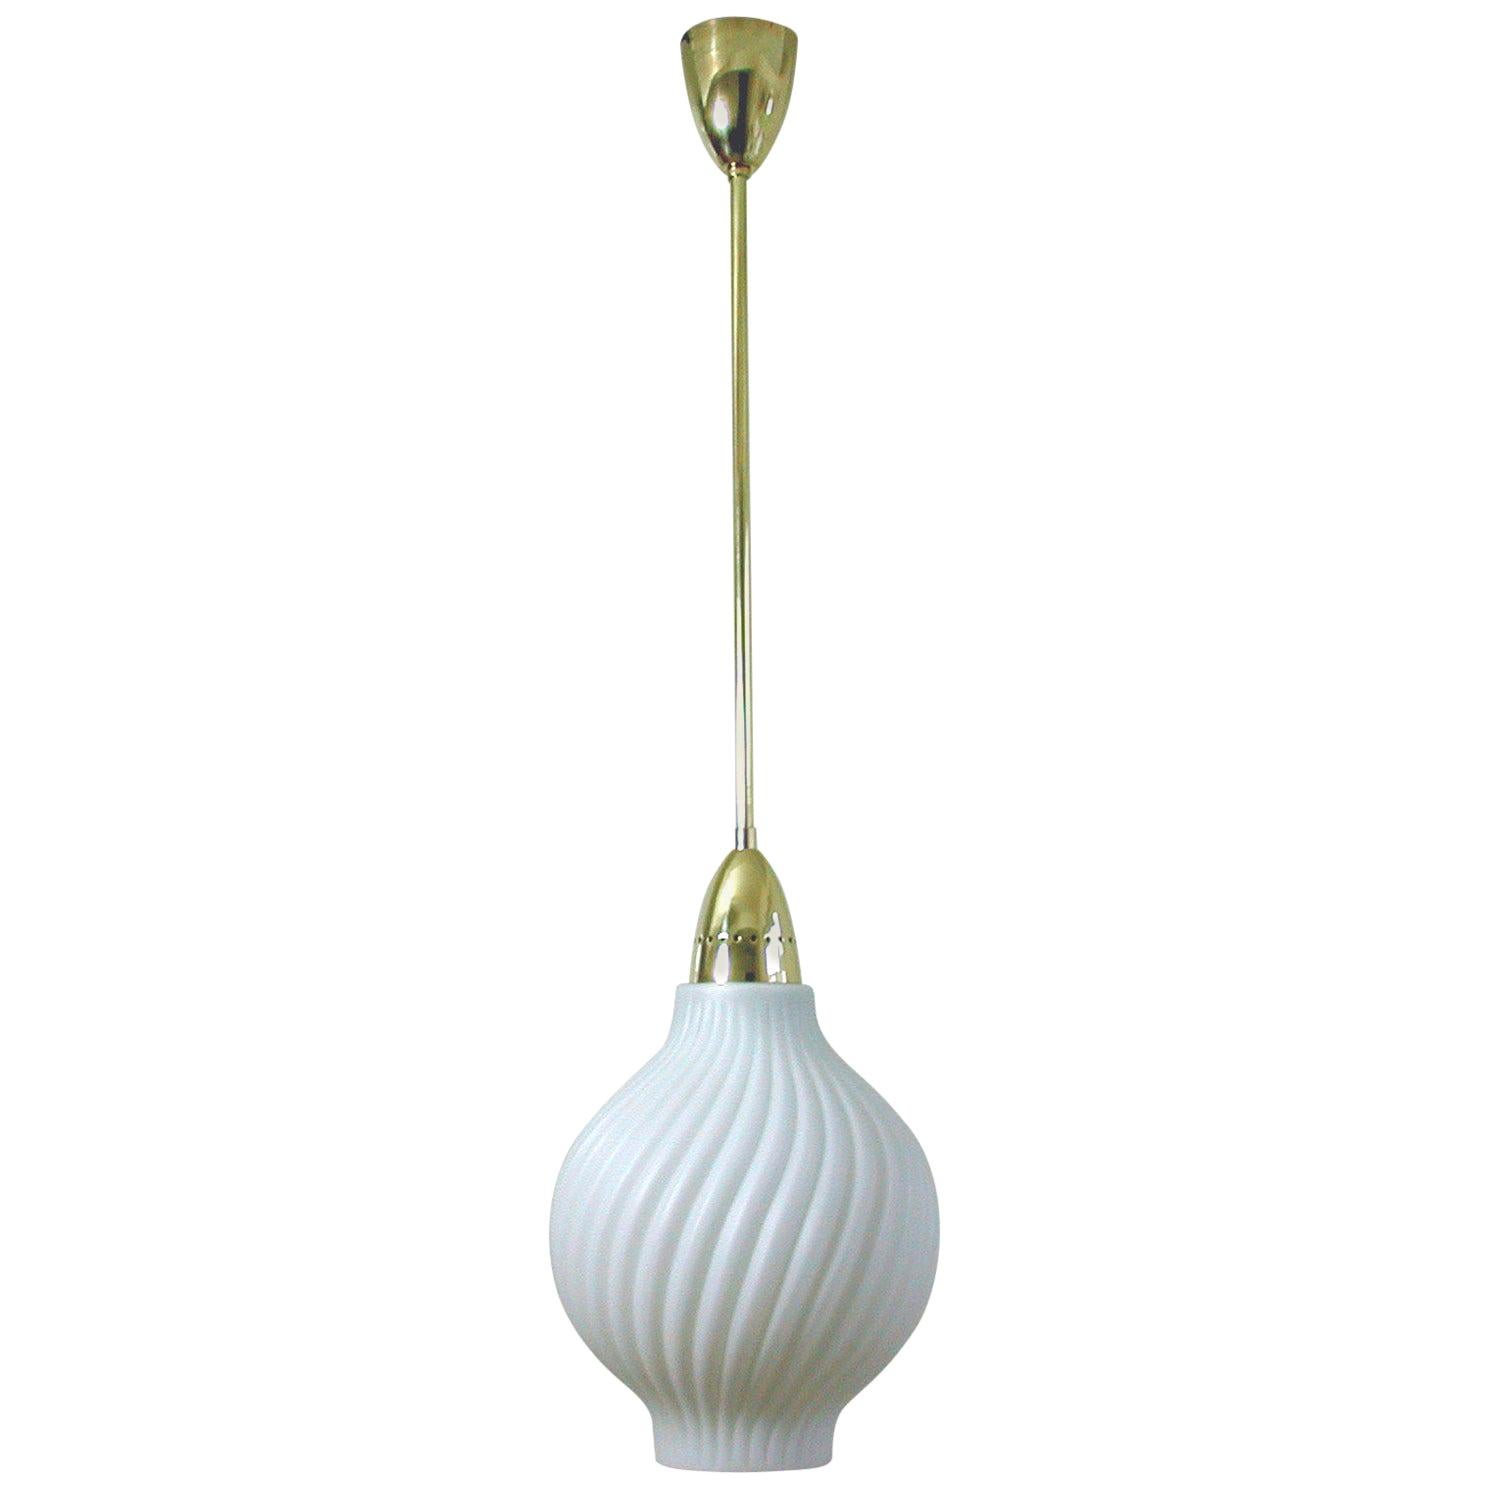 Italian Brass and Satin Opaline Glass Pendant Attributed to Arredoluce, 1950s